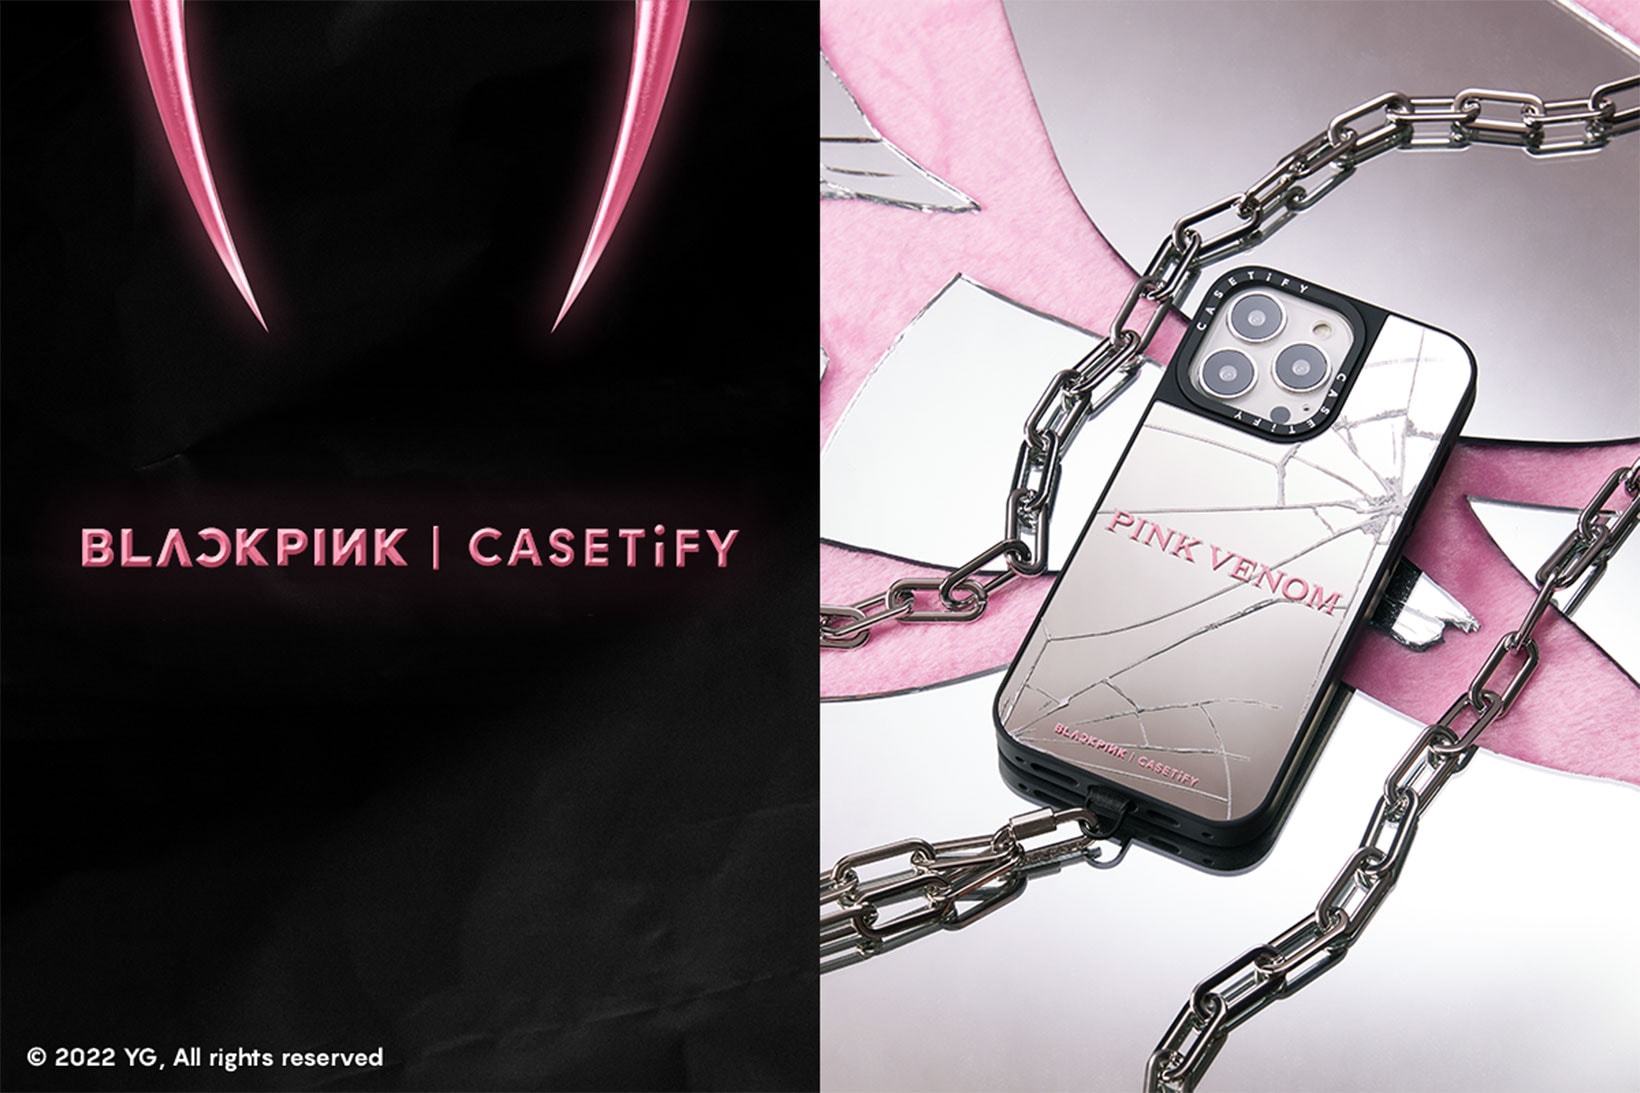 BLACKPINK Casetify Collaboration Pink Venom Phone Cases Covers Release Date Info